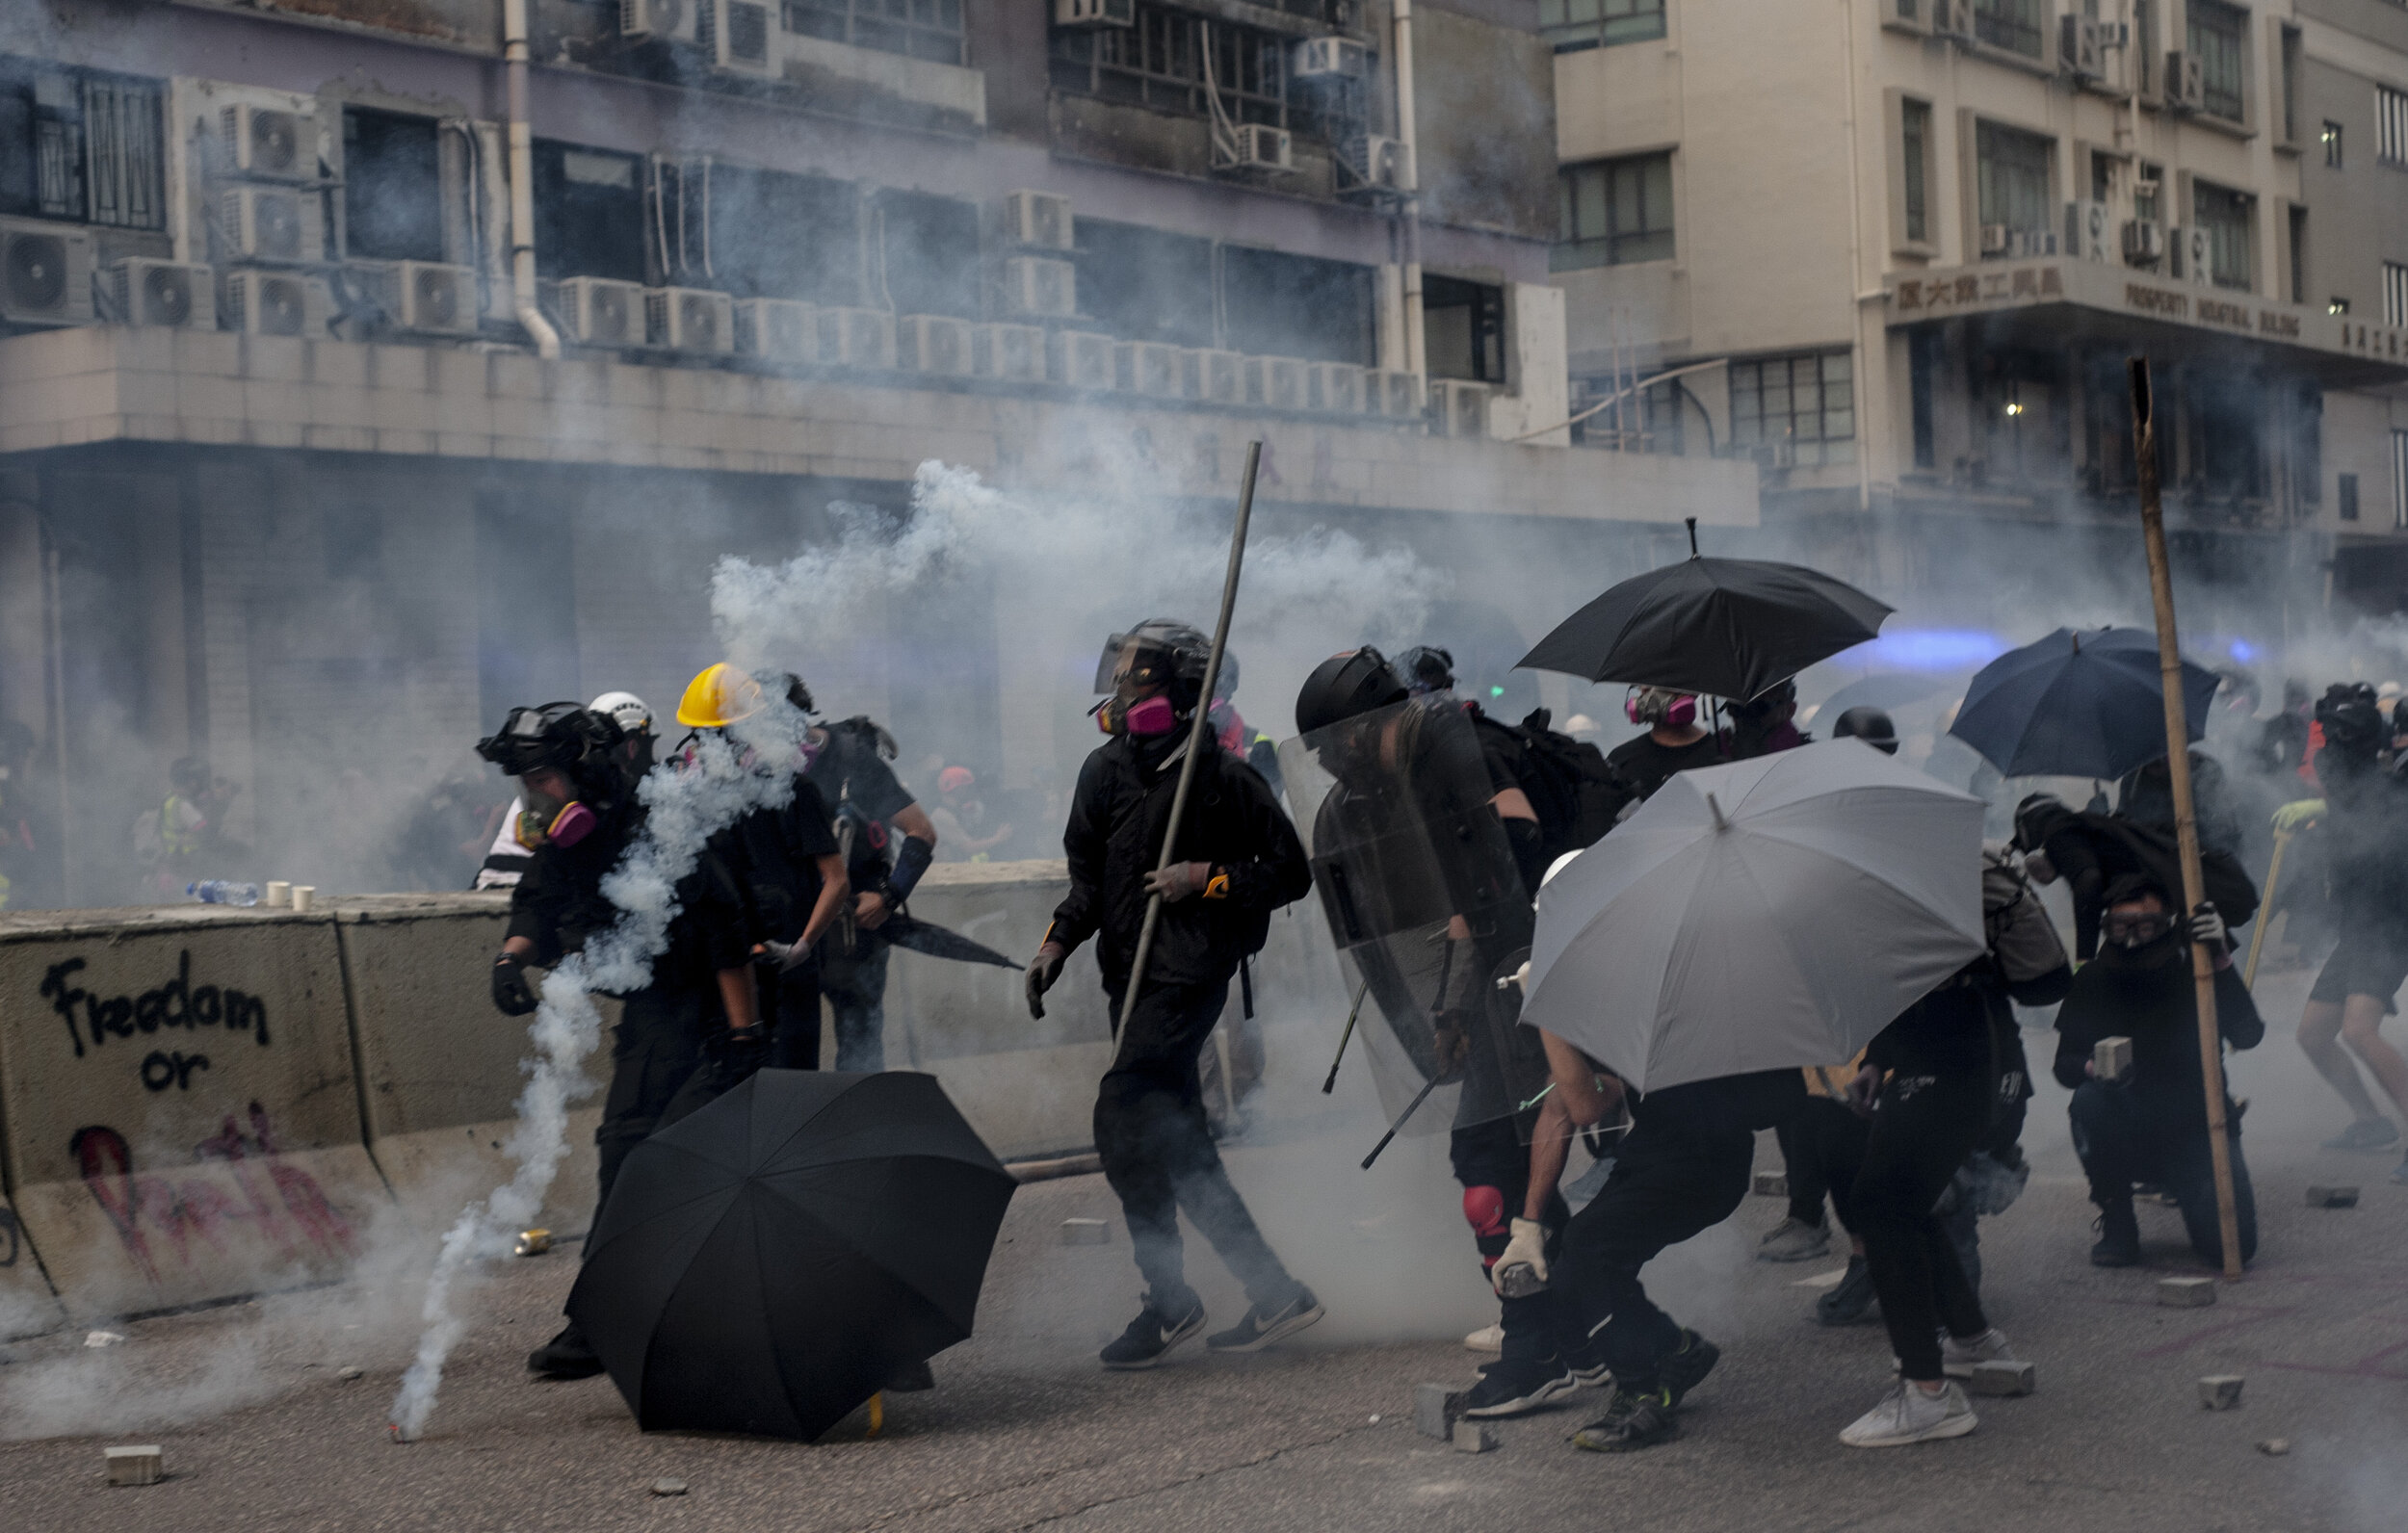  Pro-democracy protesters try to push forward towards police under a hail of tear gas canisters, rubber bullets, and pepper ball rounds during heavy clashes with police in Kwun Tong on August 24, 2019.  